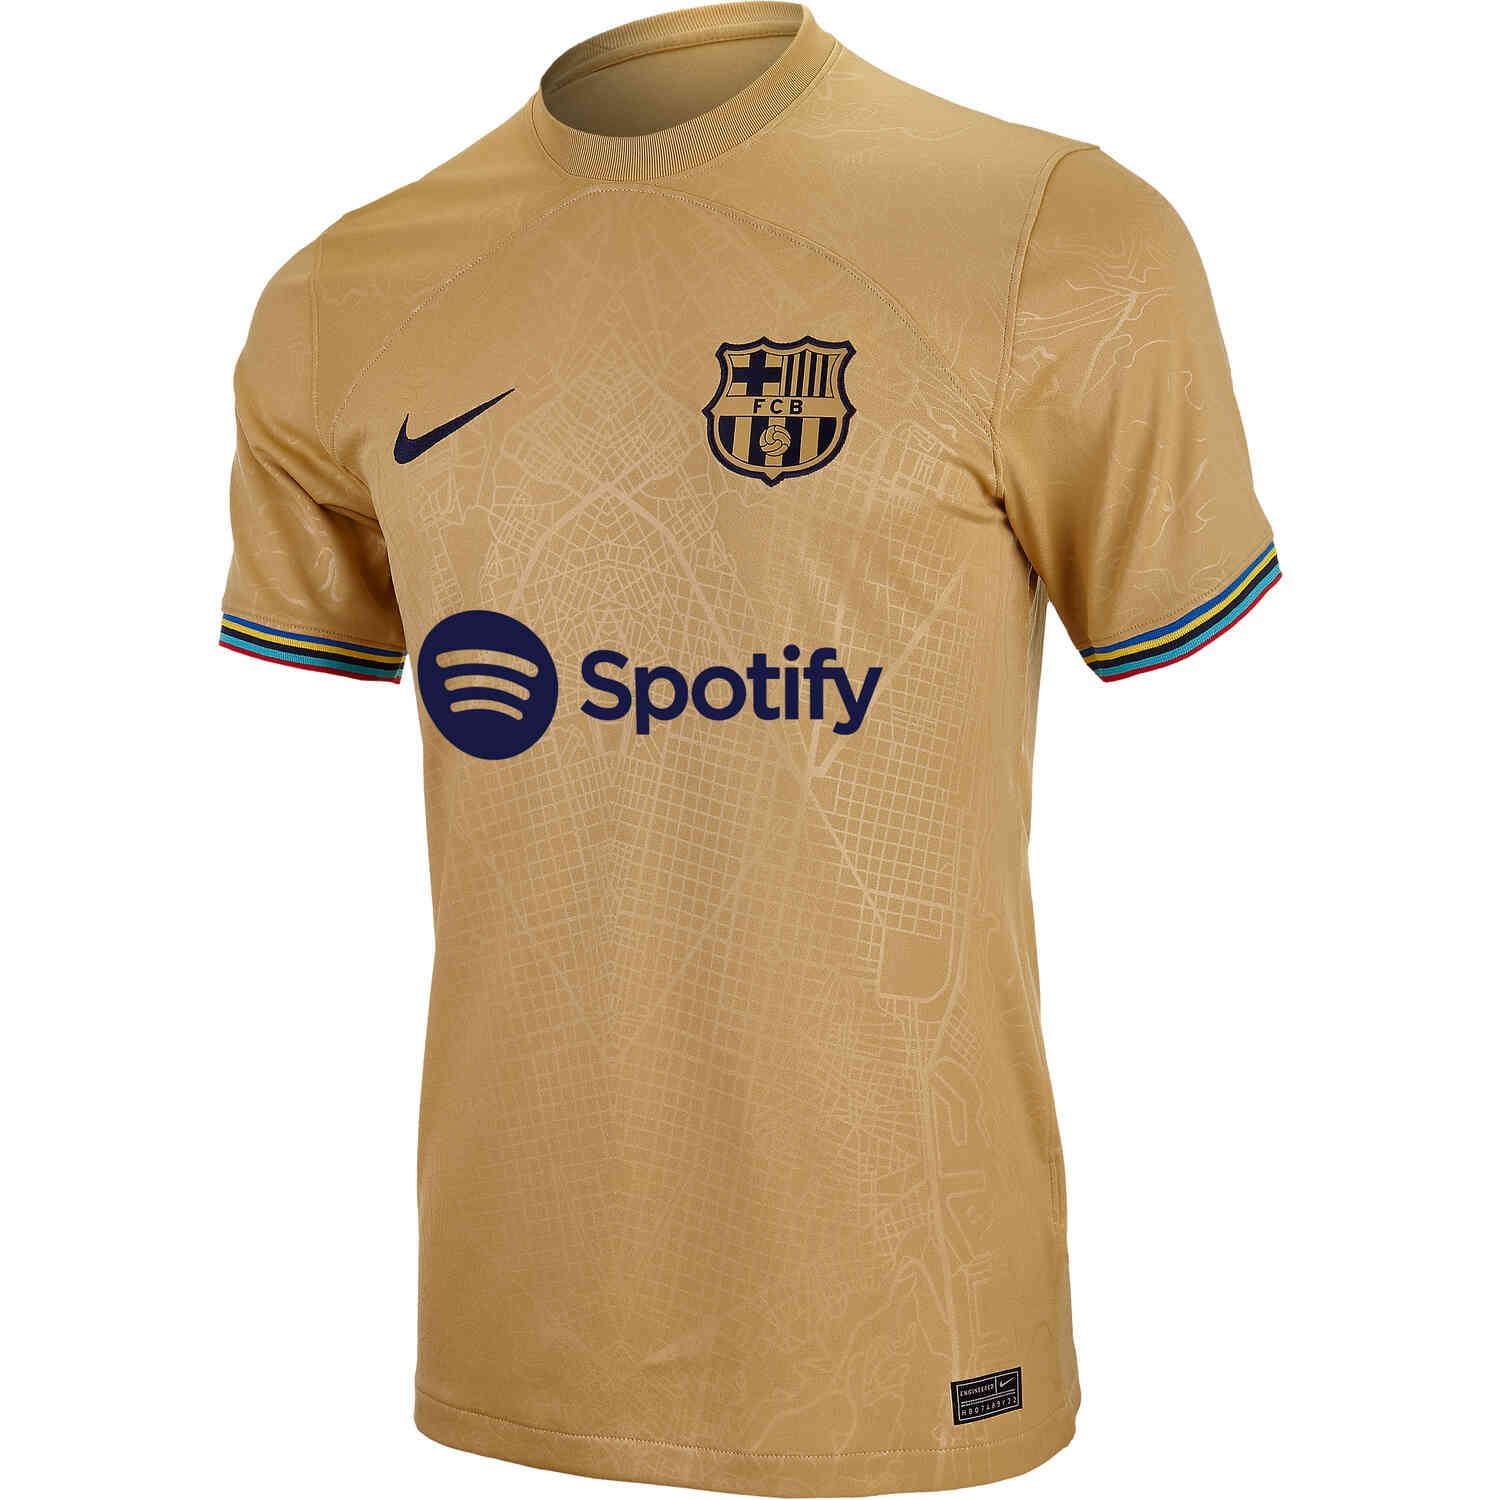 New FC Barcelona jersey expresses the Club's passion for the city